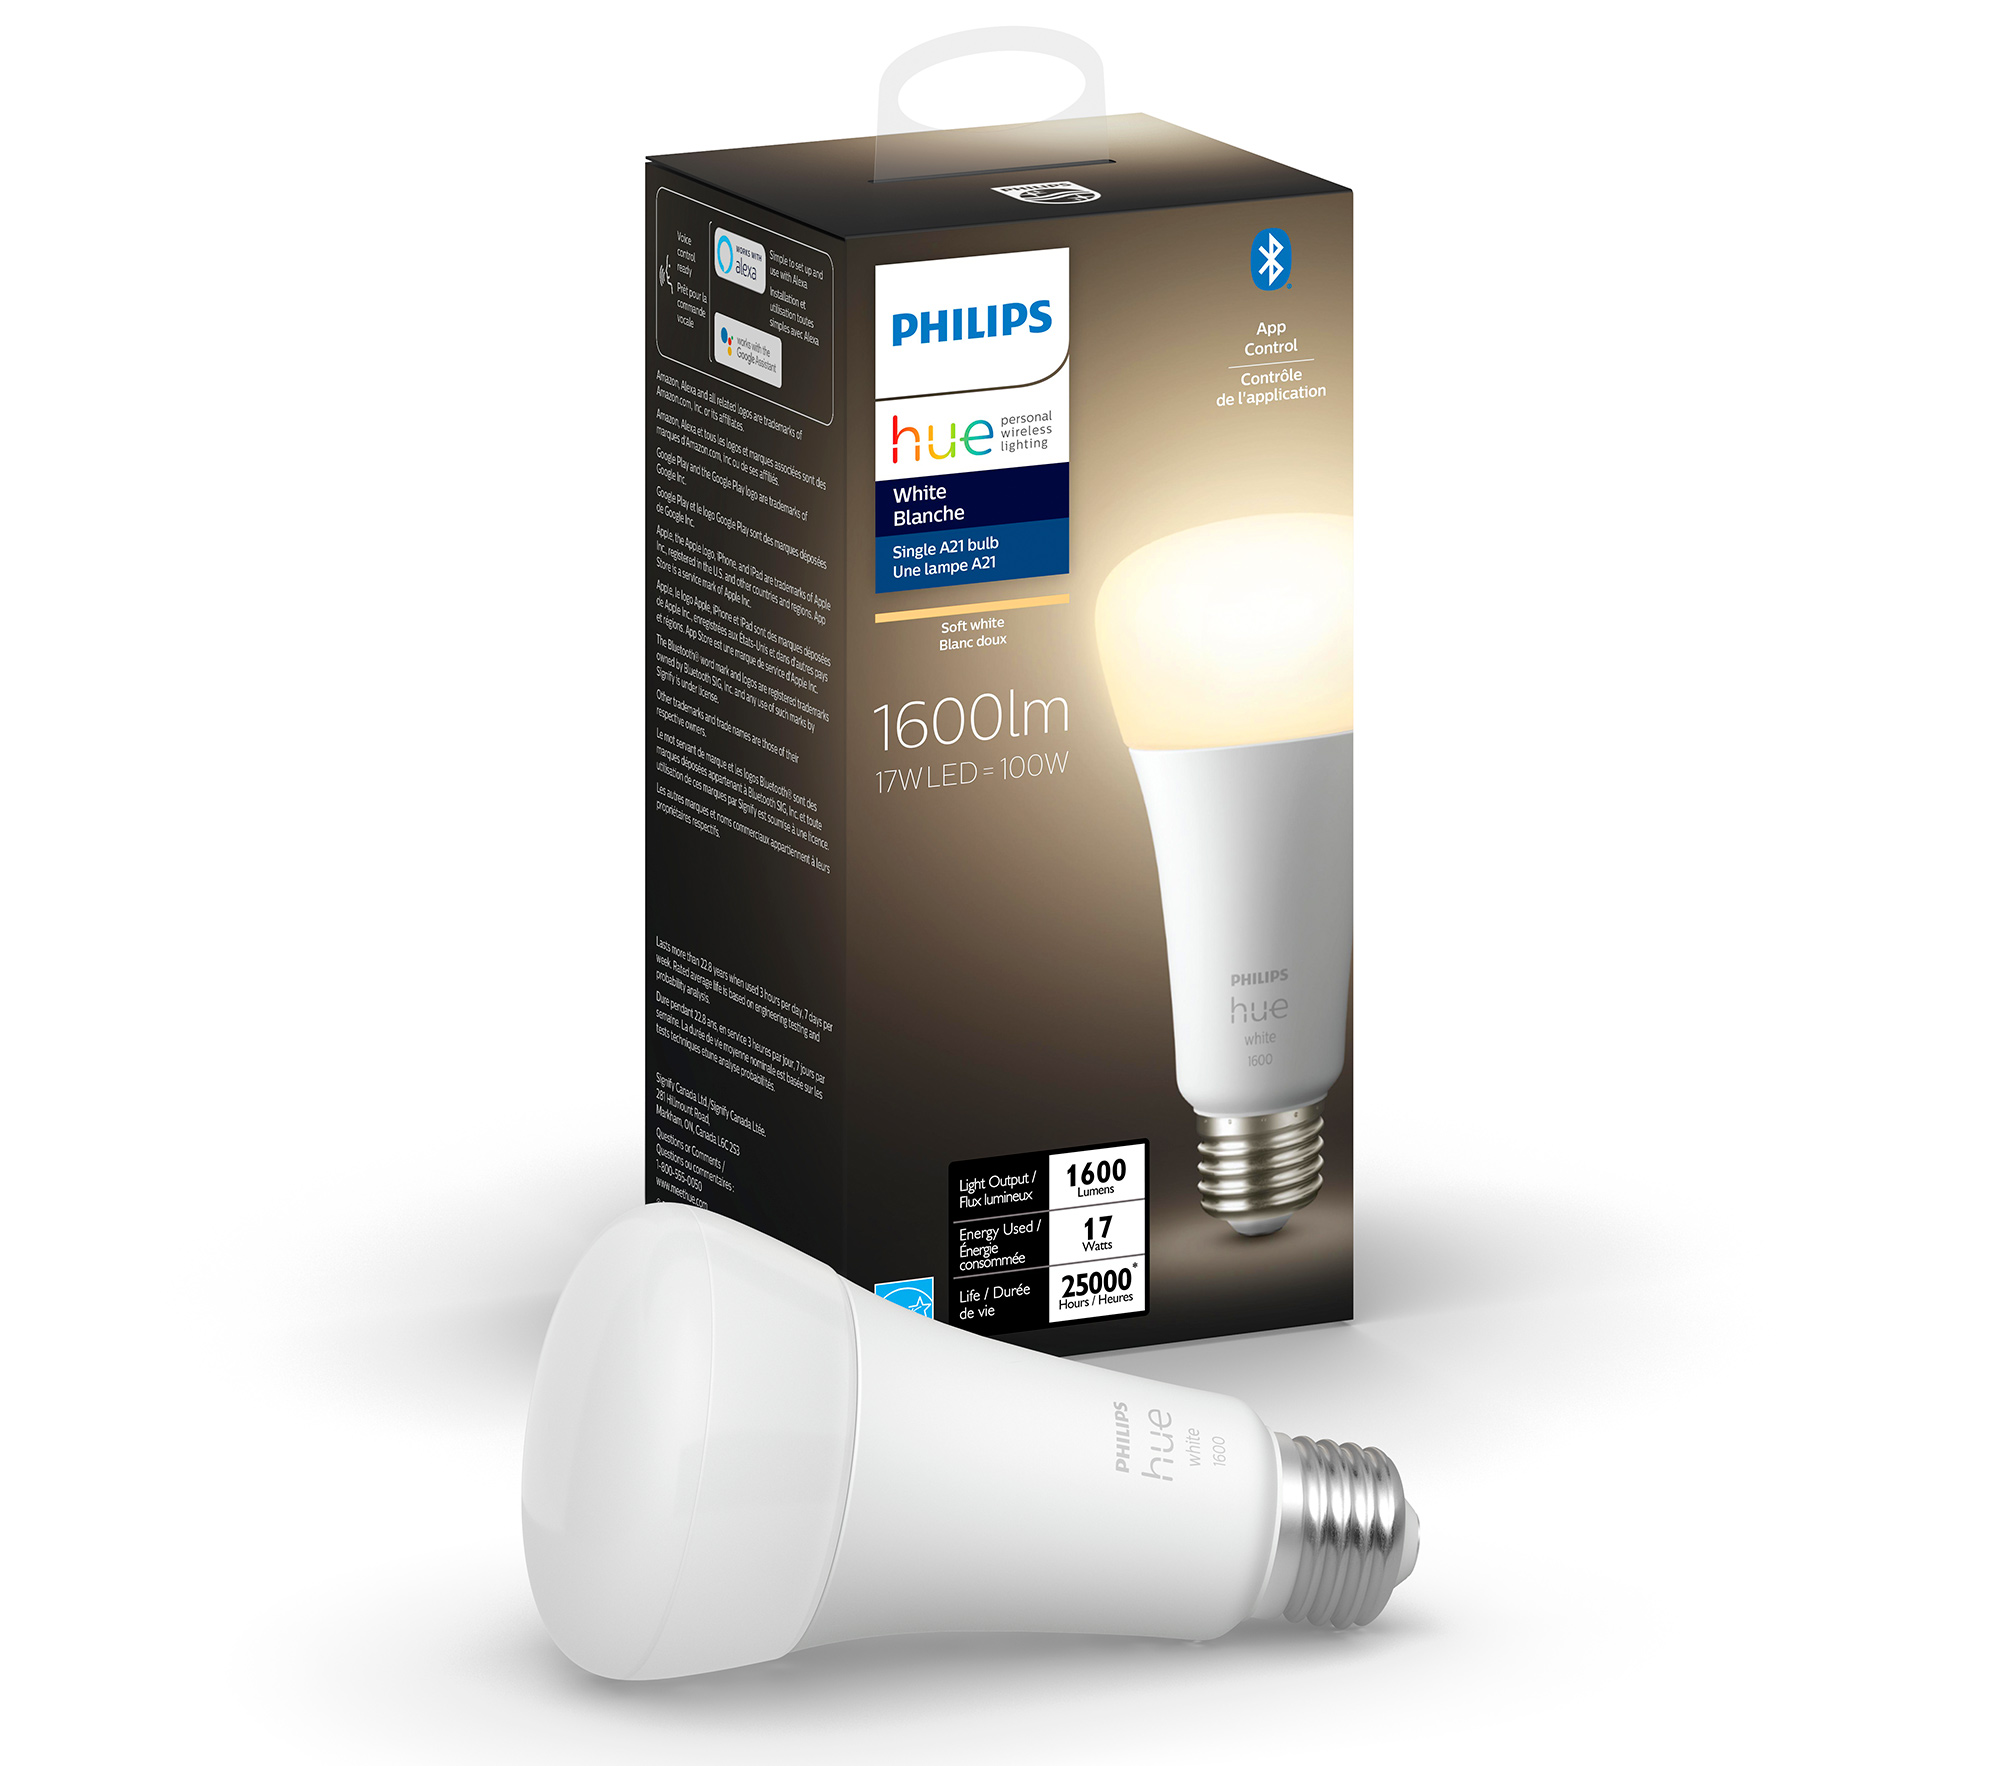 Apple HomeKit and Google Assistant Philips Hue White and Color Ambiance A19 60W Equivalent LED Smart Light Bulb Starter Kit  4 A19 Smart Bulbs and 1 Bridge Works with Alexa California Residents 